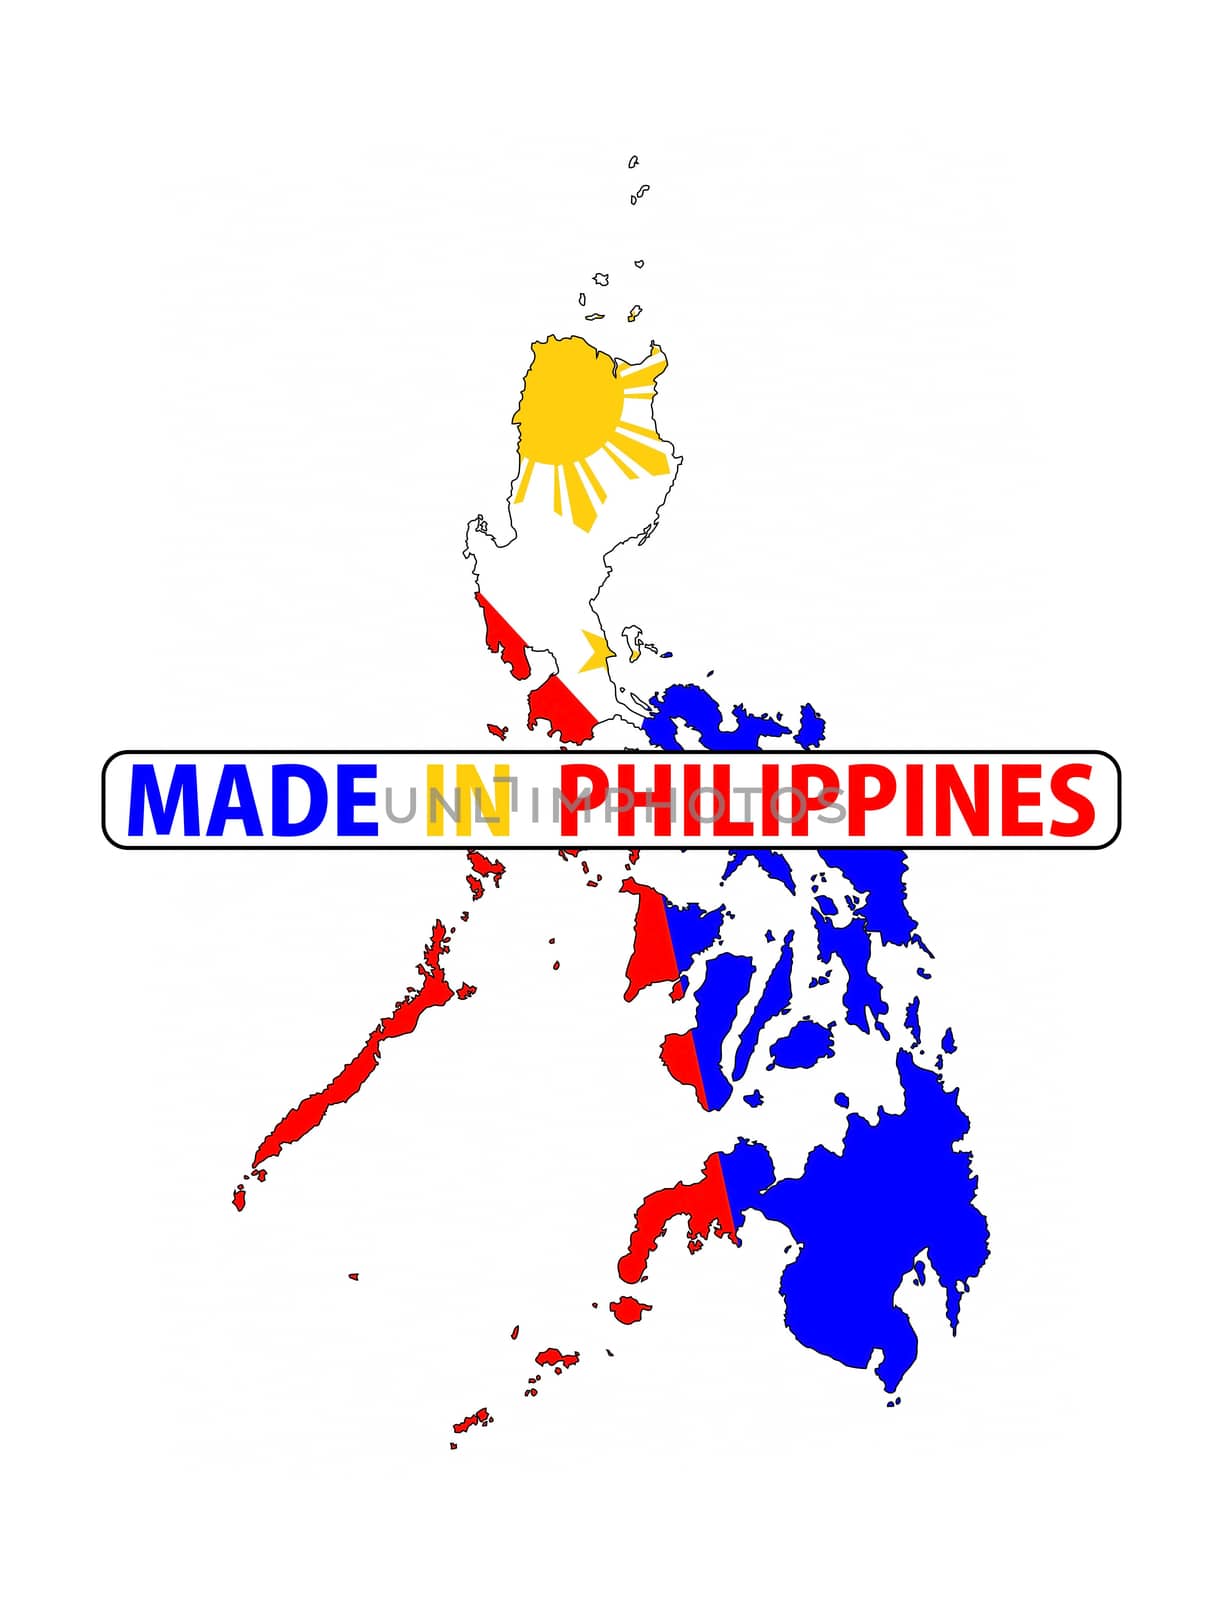 made in philippines country national flag map shape with text